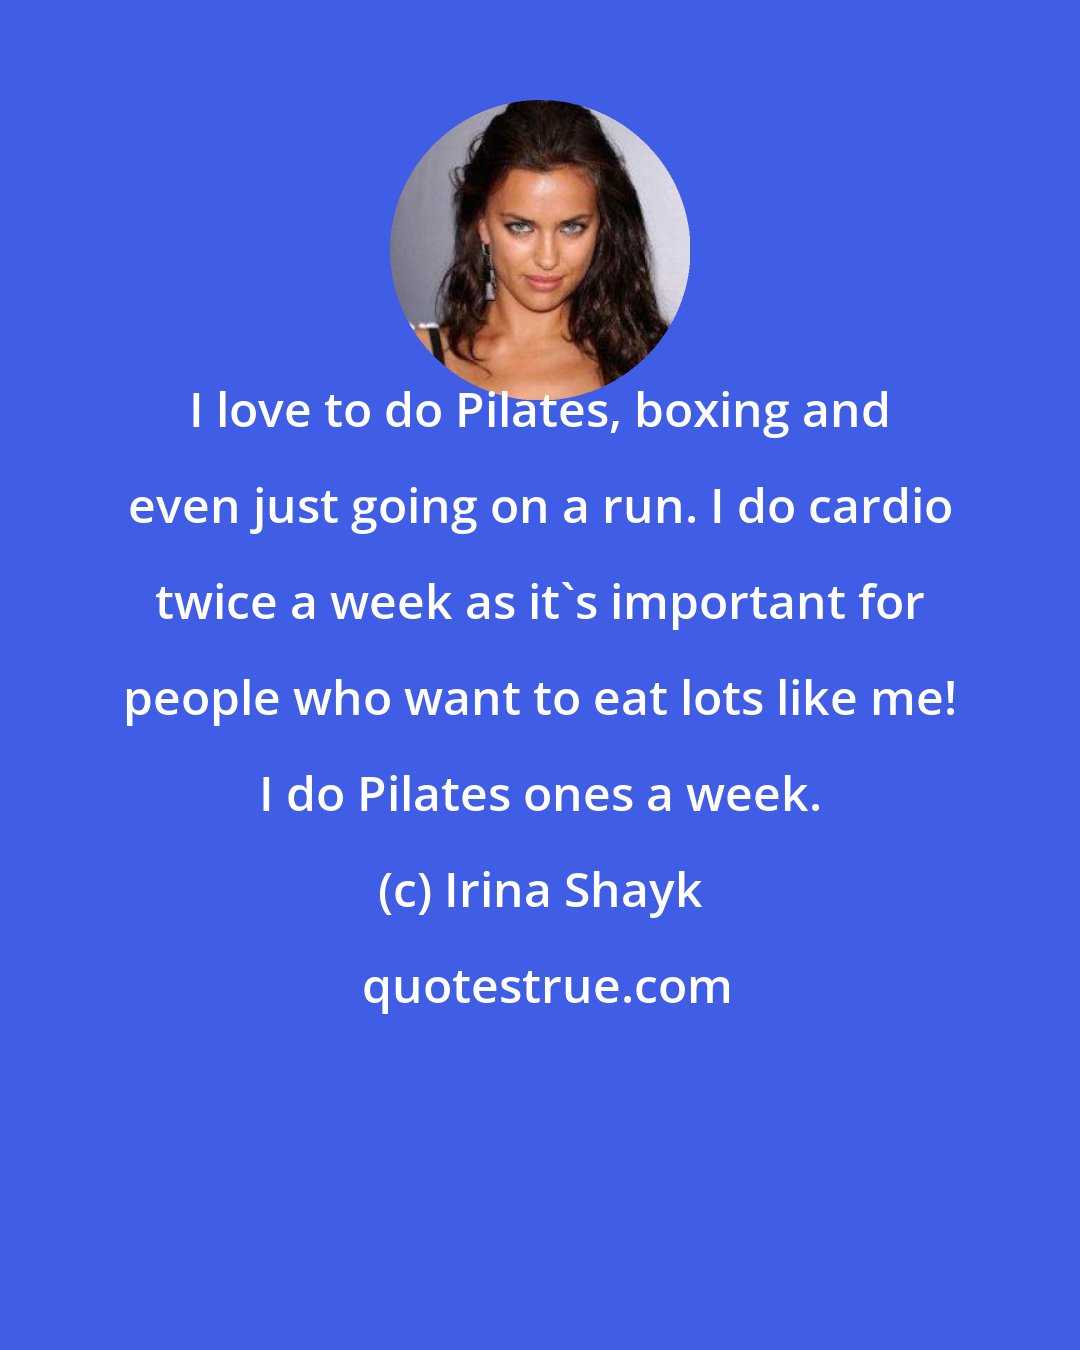 Irina Shayk: I love to do Pilates, boxing and even just going on a run. I do cardio twice a week as it's important for people who want to eat lots like me! I do Pilates ones a week.